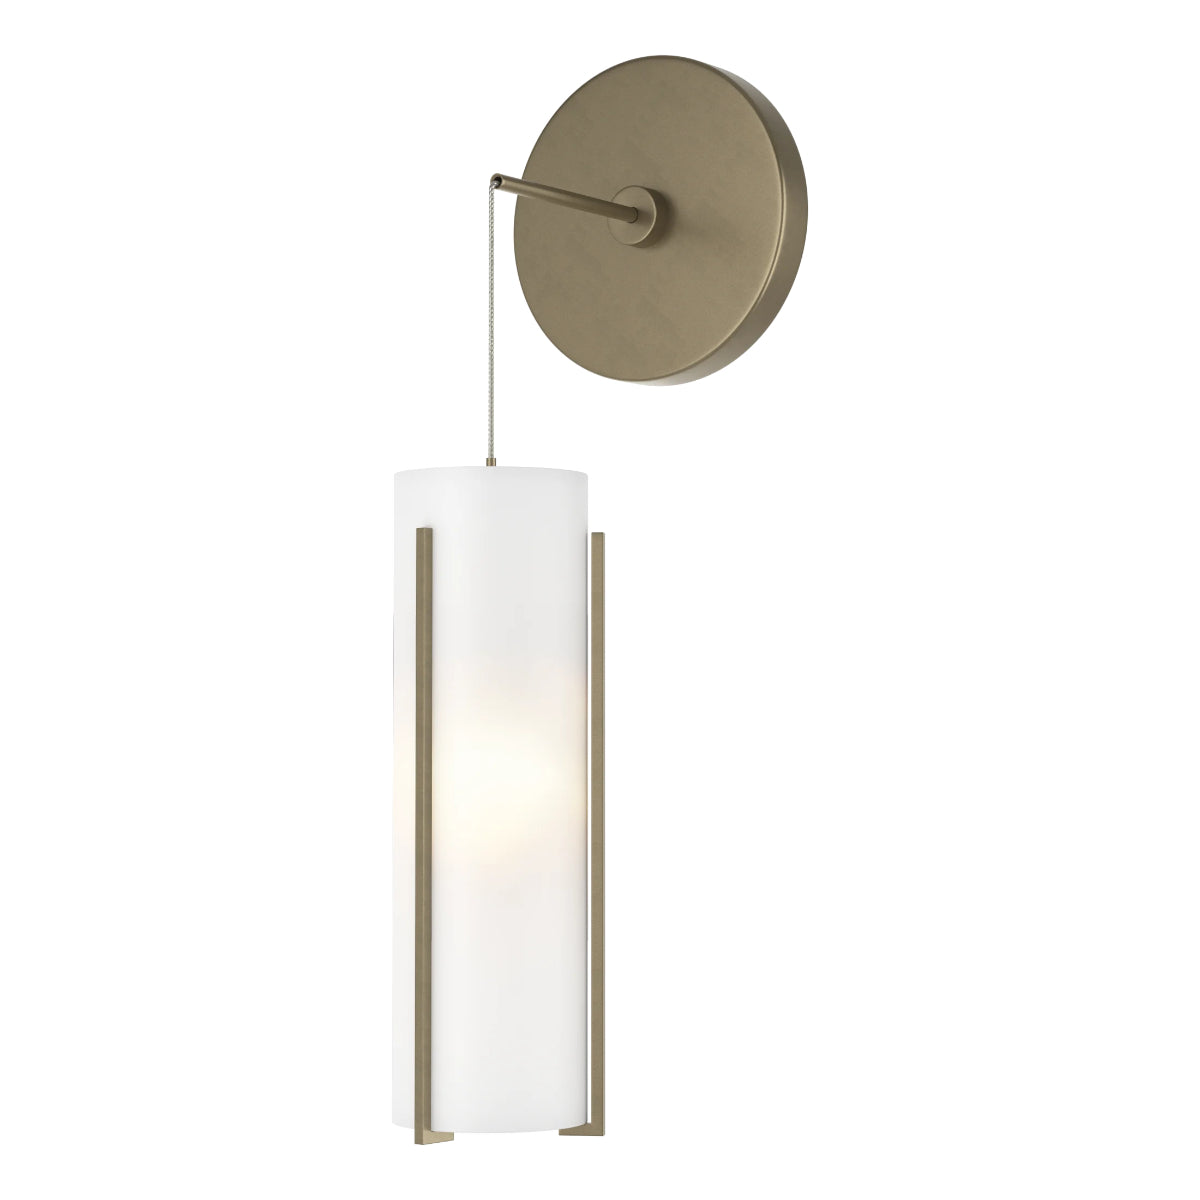 Exos 6 in. Armed Sconce